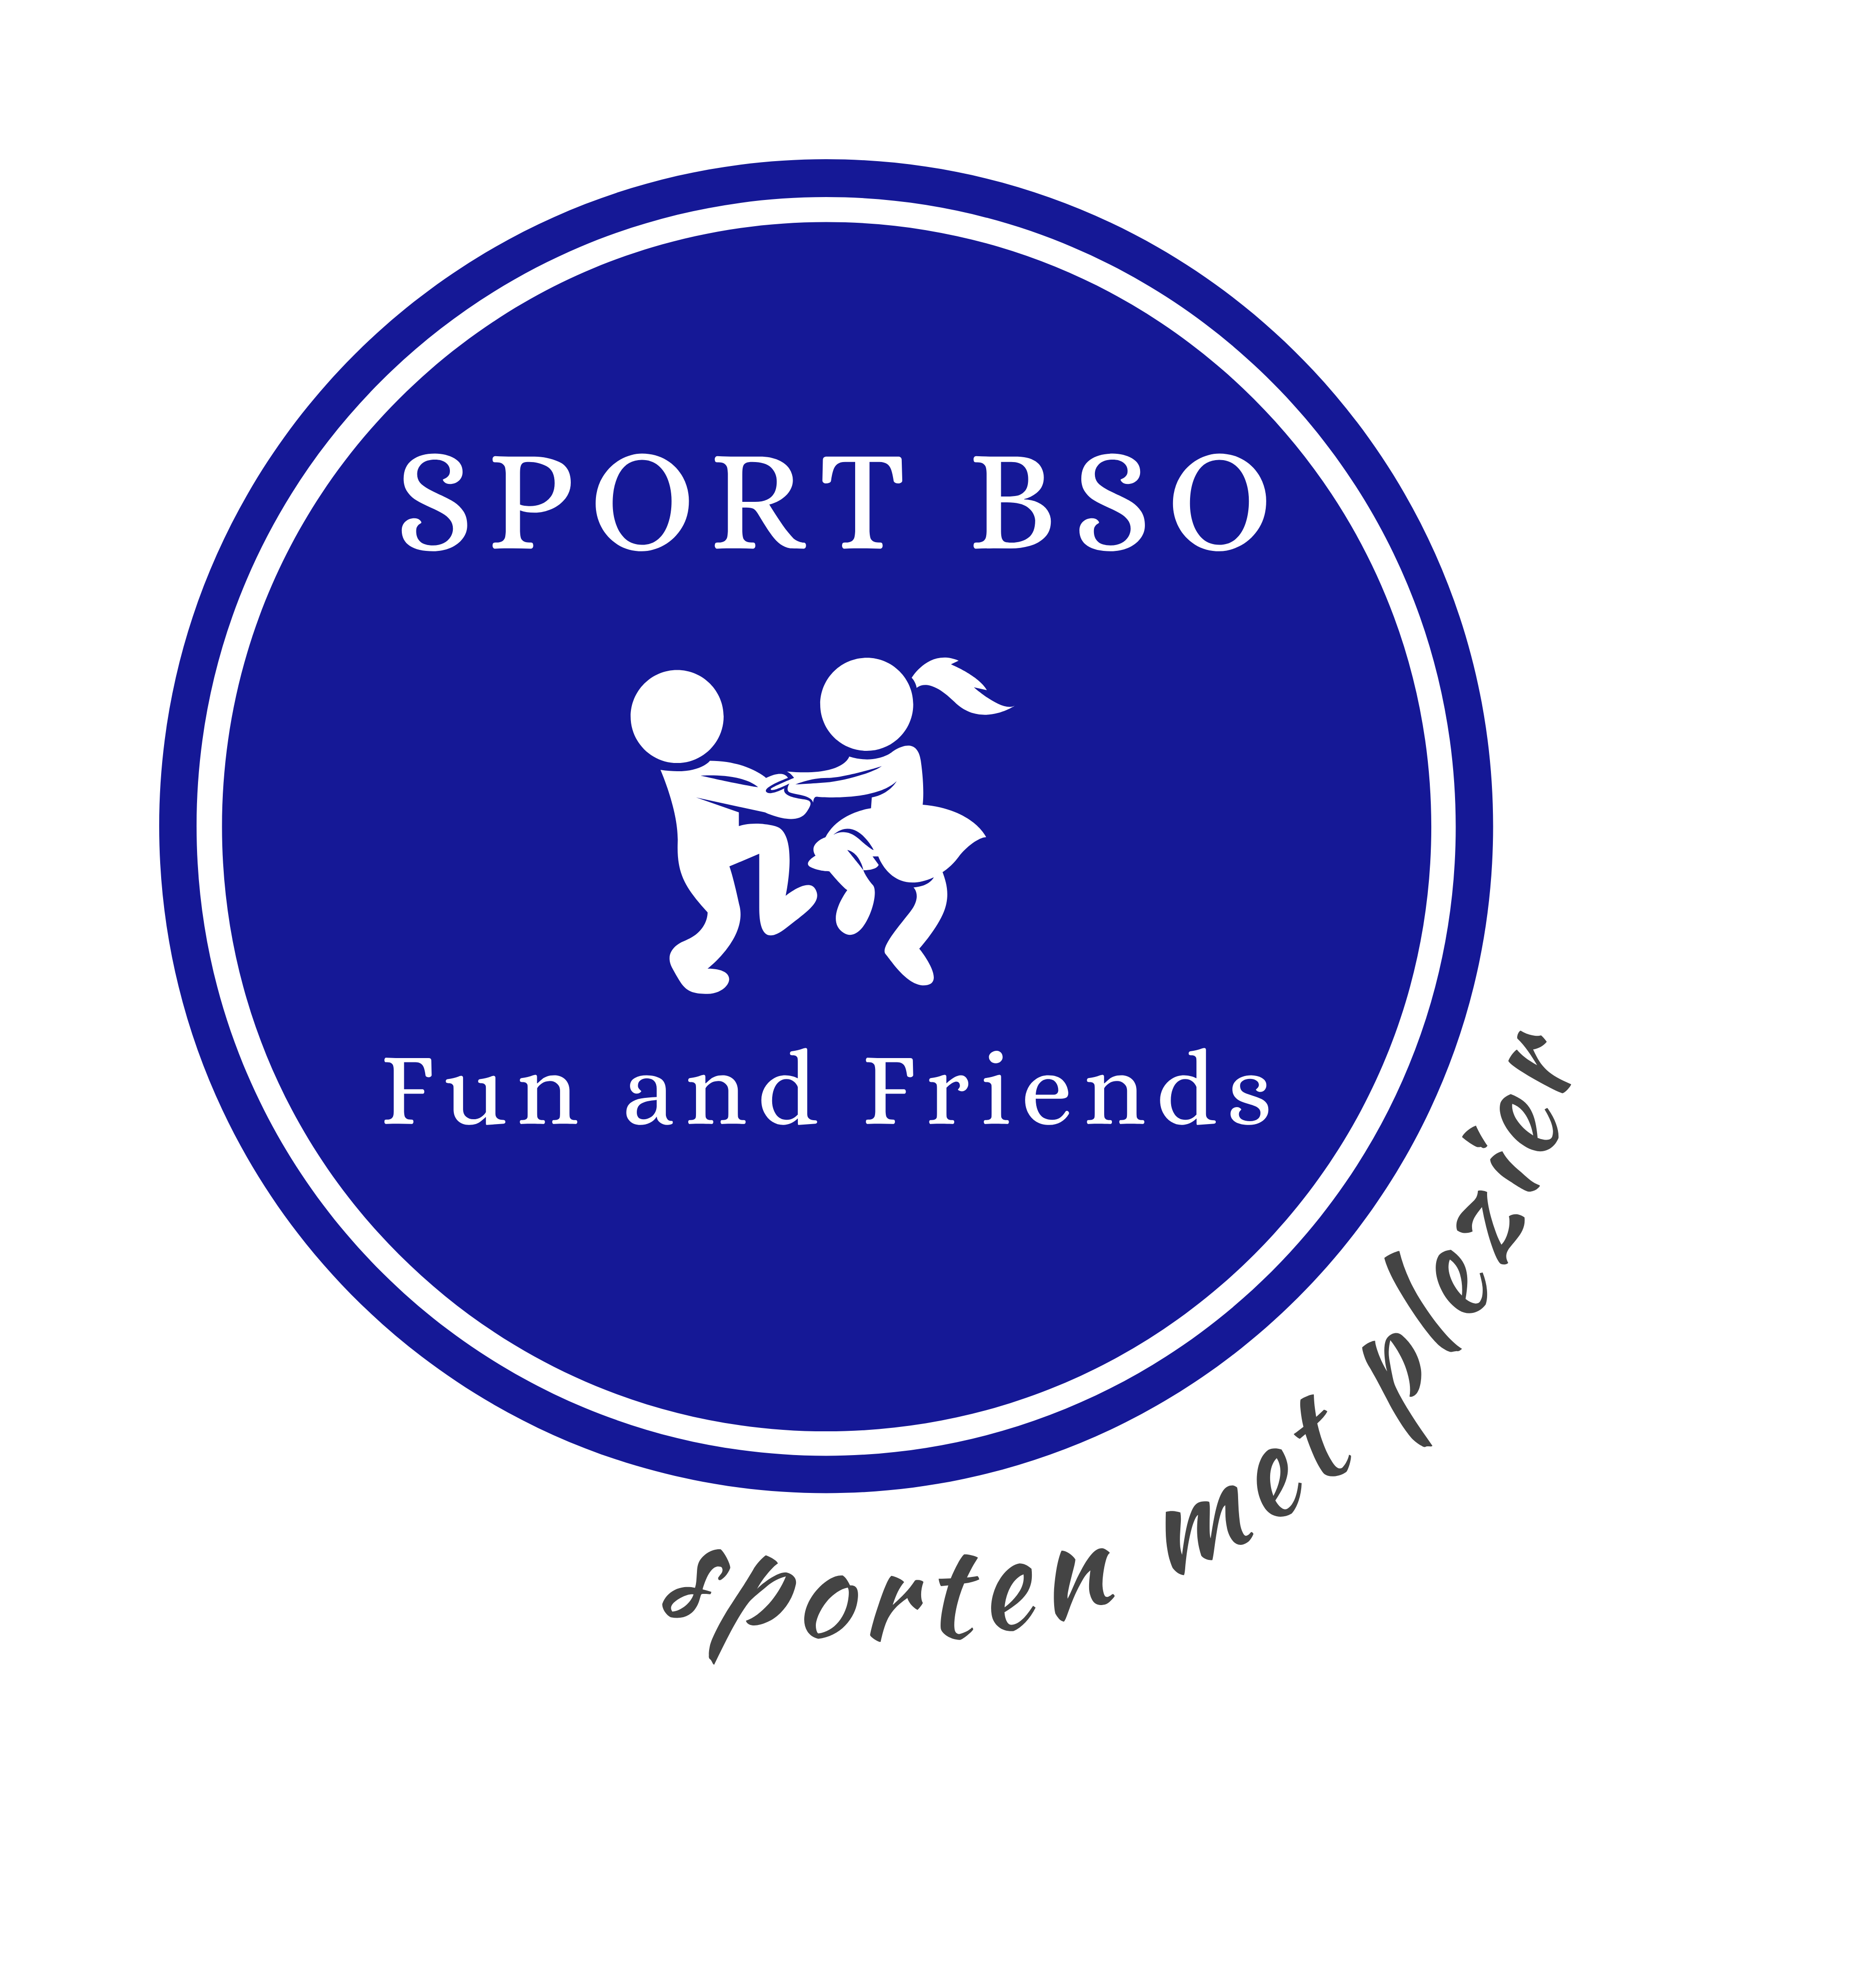 Sport BSO Fun and Friends